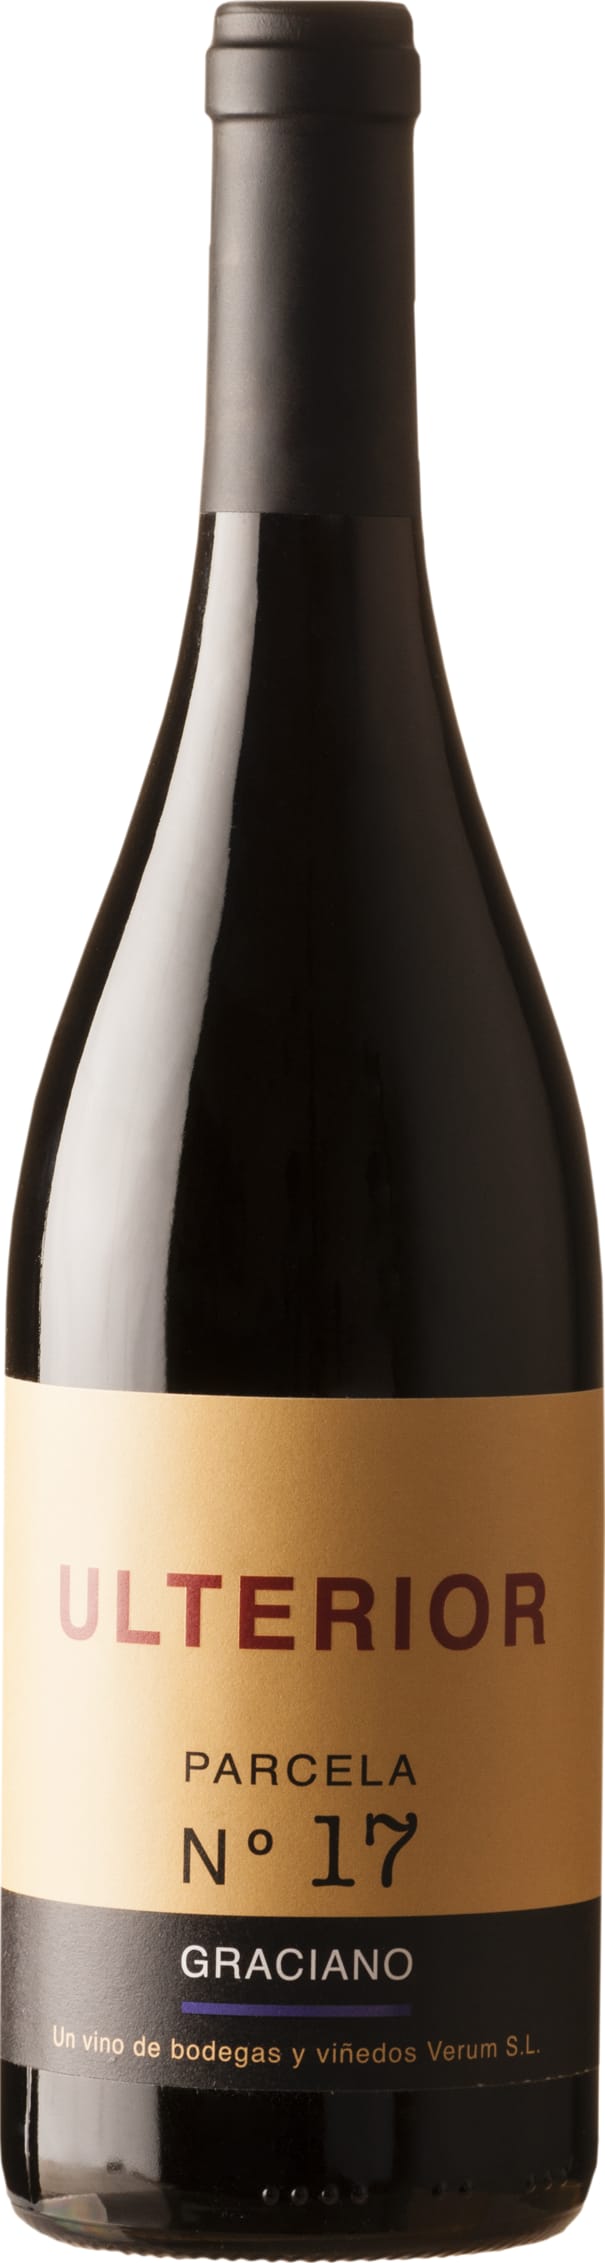 Bodegas Verum Ulterior Graciano Parcela No 17 Organic 2017 75cl - Buy Bodegas Verum Wines from GREAT WINES DIRECT wine shop